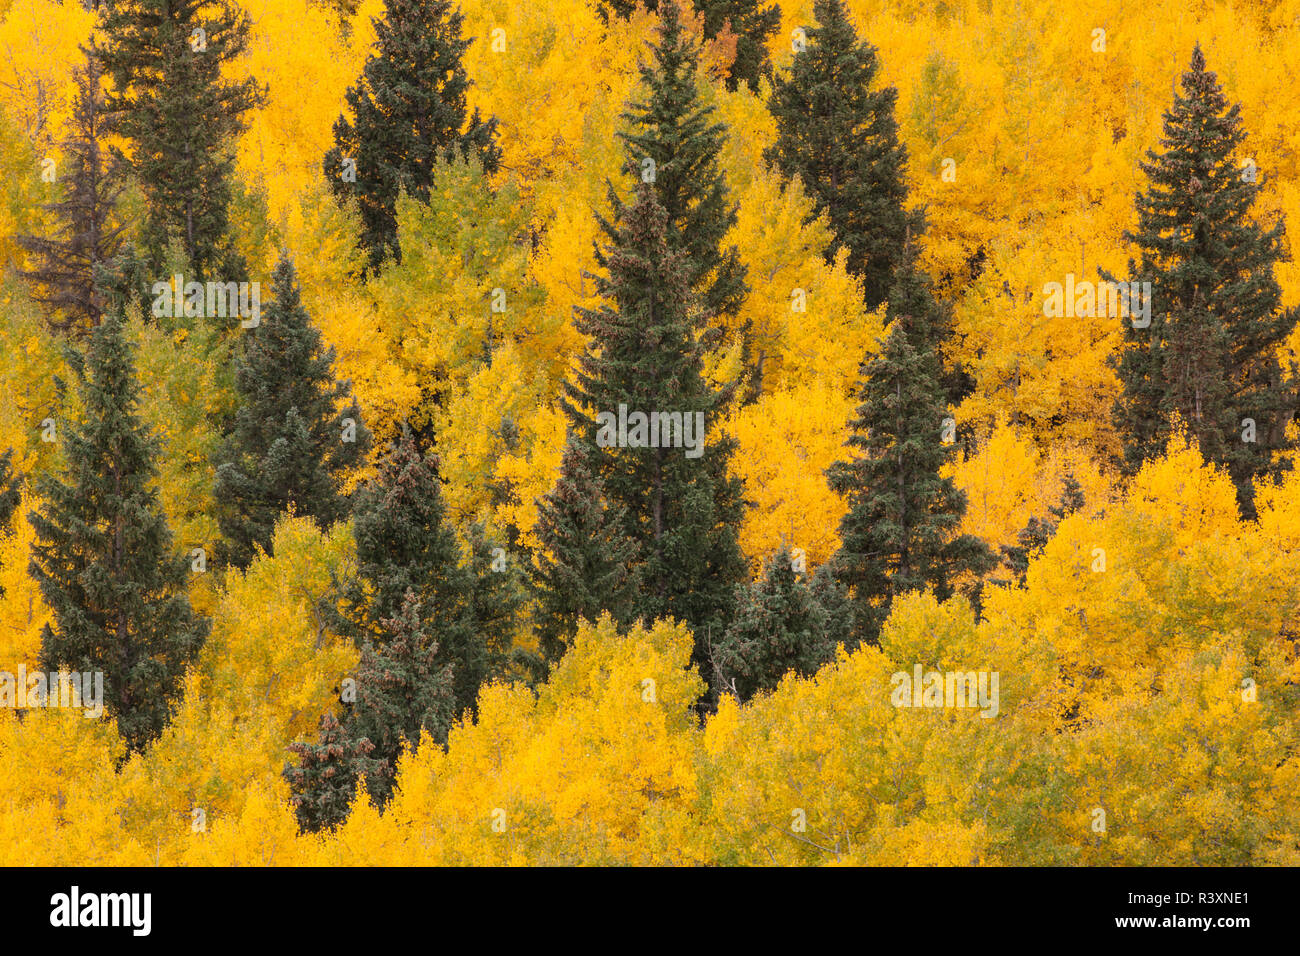 USA, Colorado, San Juan National Forest. Spruce and aspen forest. Stock Photo